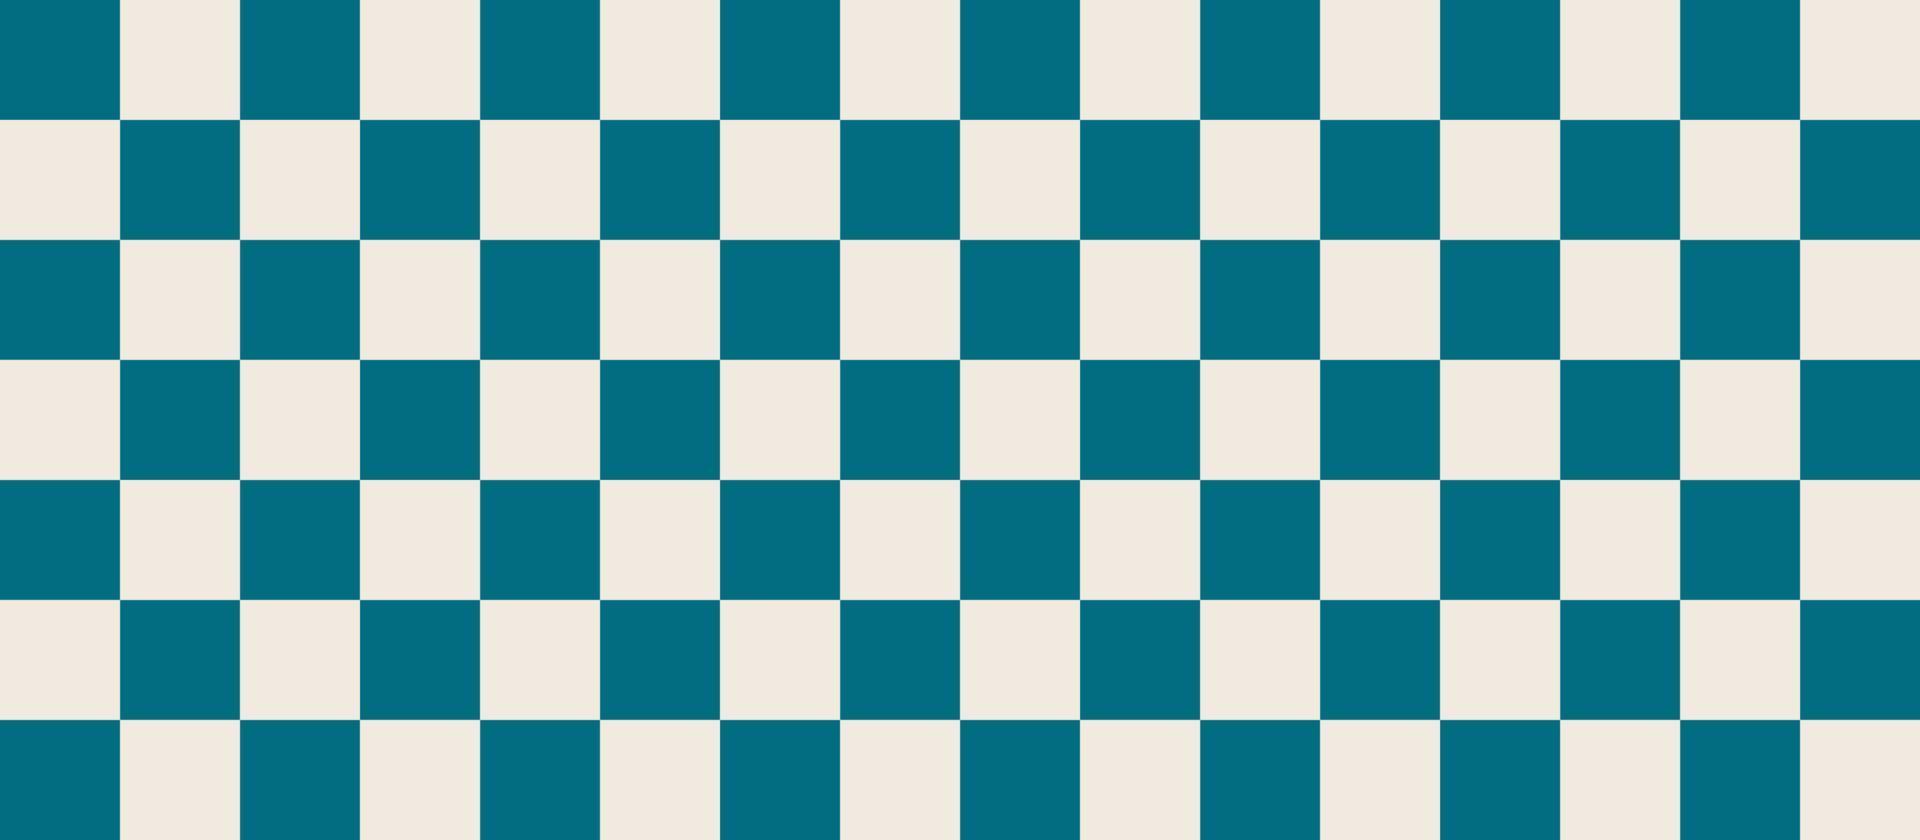 Checkered pattern vector illustration of banner background